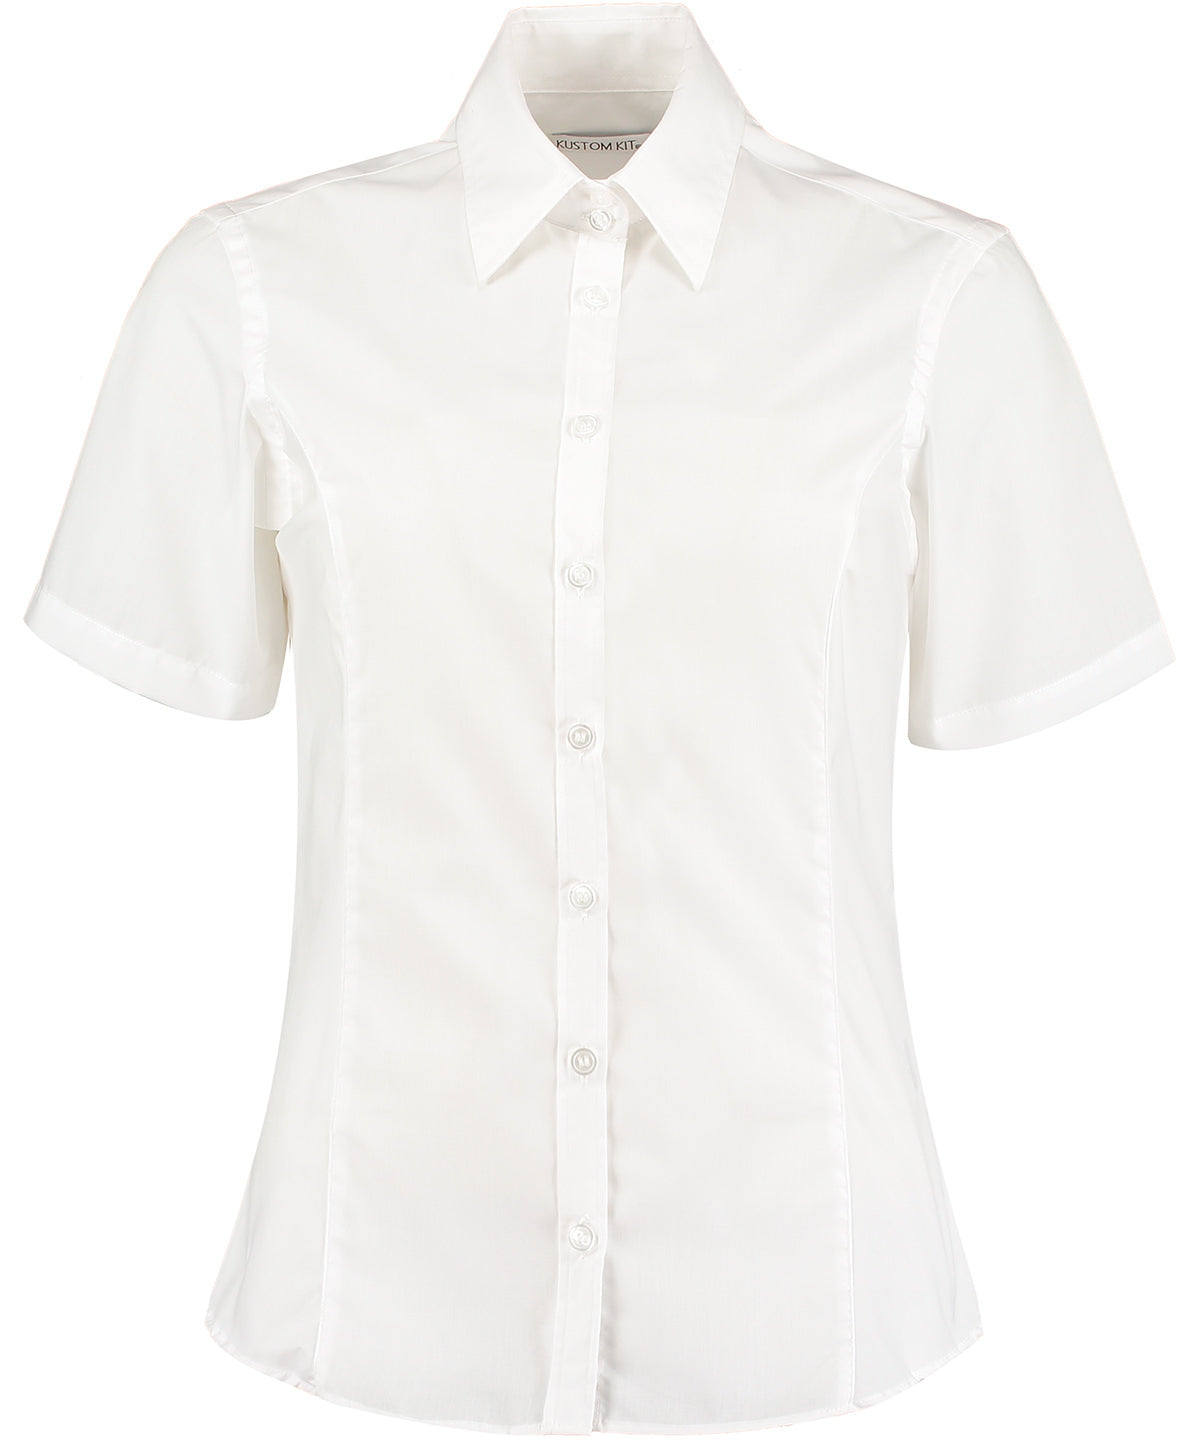 Blússur - Business Blouse Short-sleeved (tailored Fit)